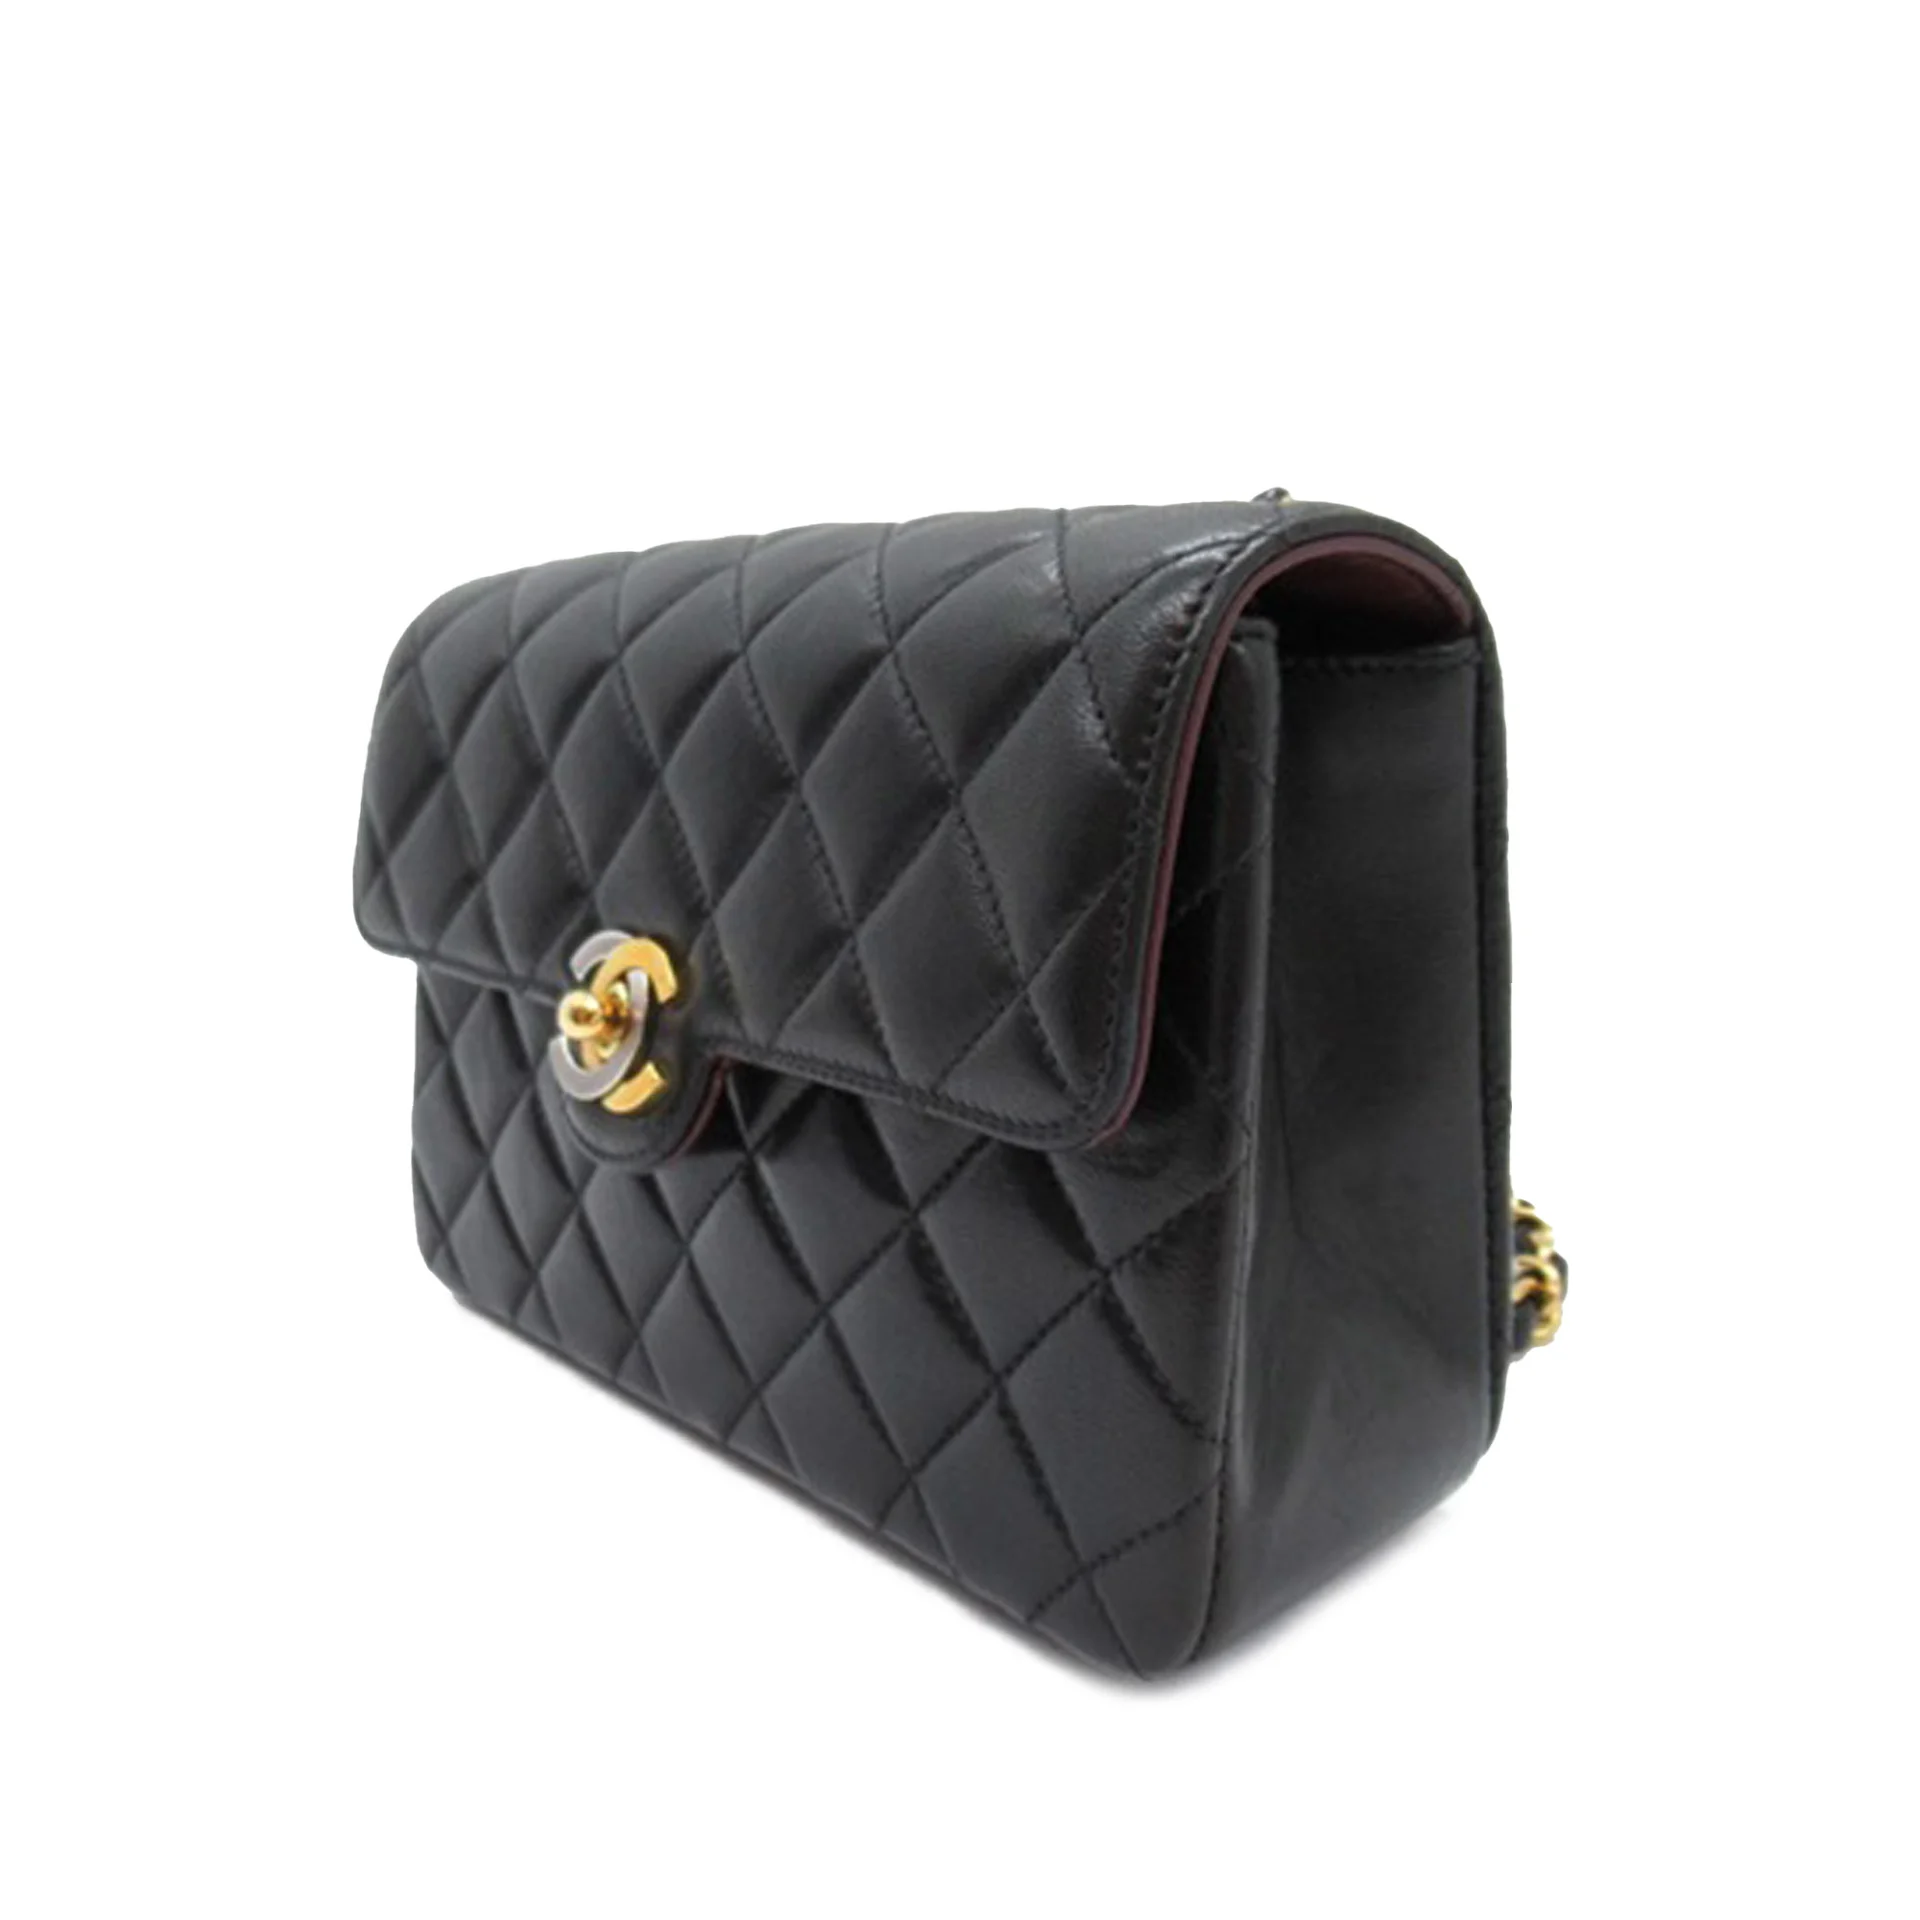 Chanel Mini Cc Quilted Lambskin Leather Crossbody